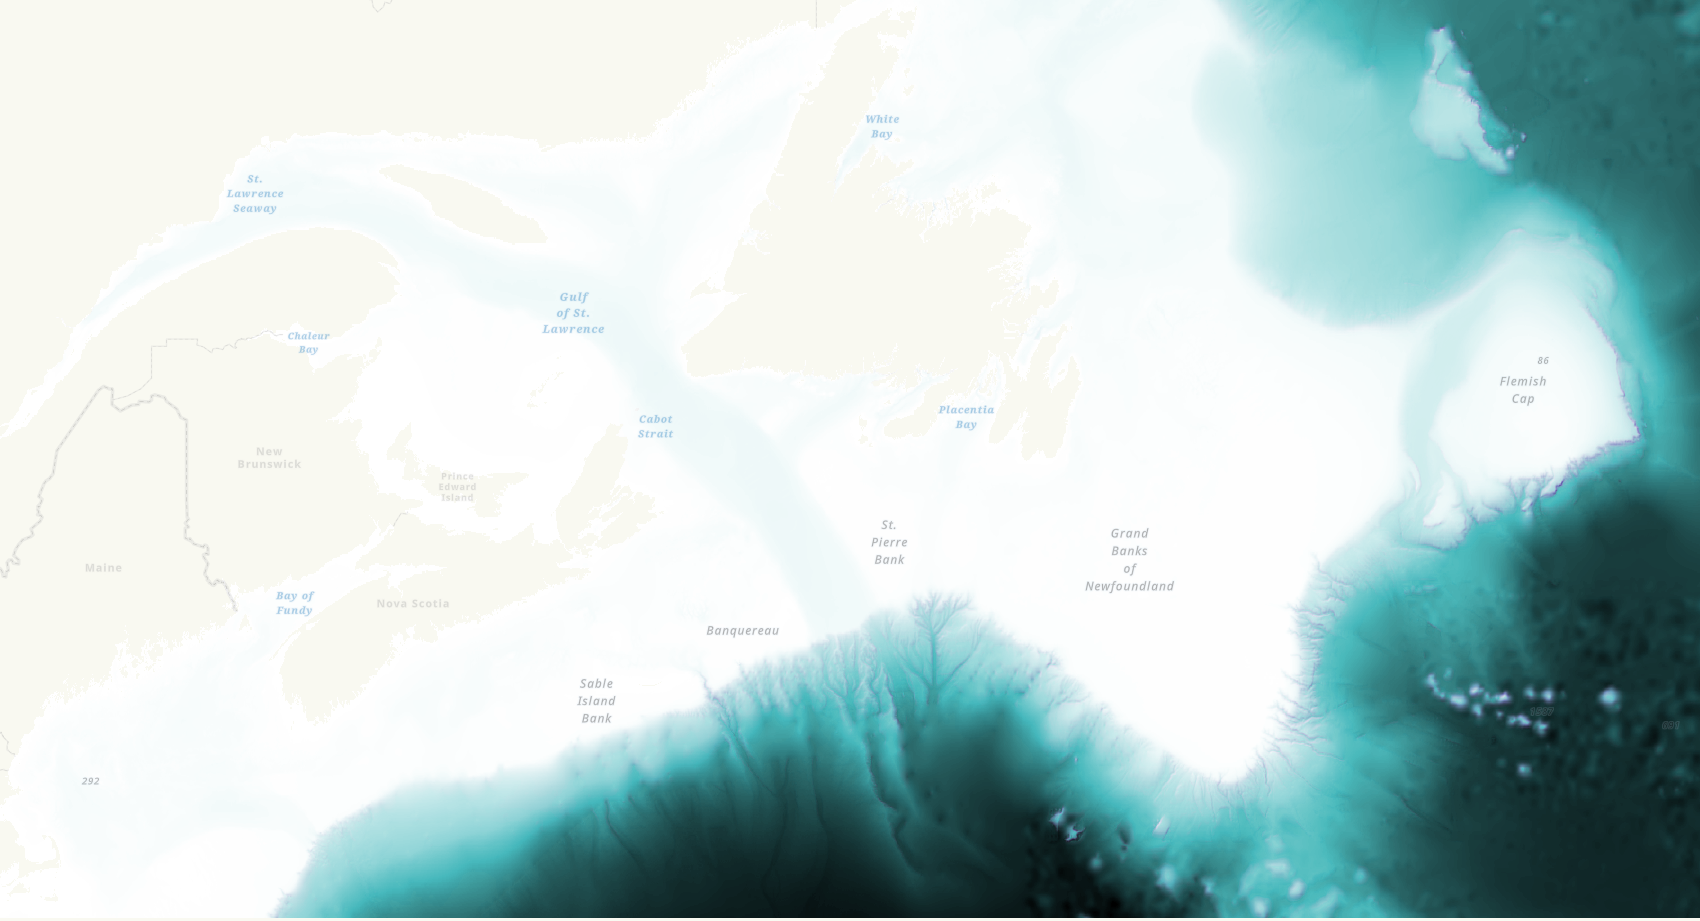 Bathymetry with muted colors